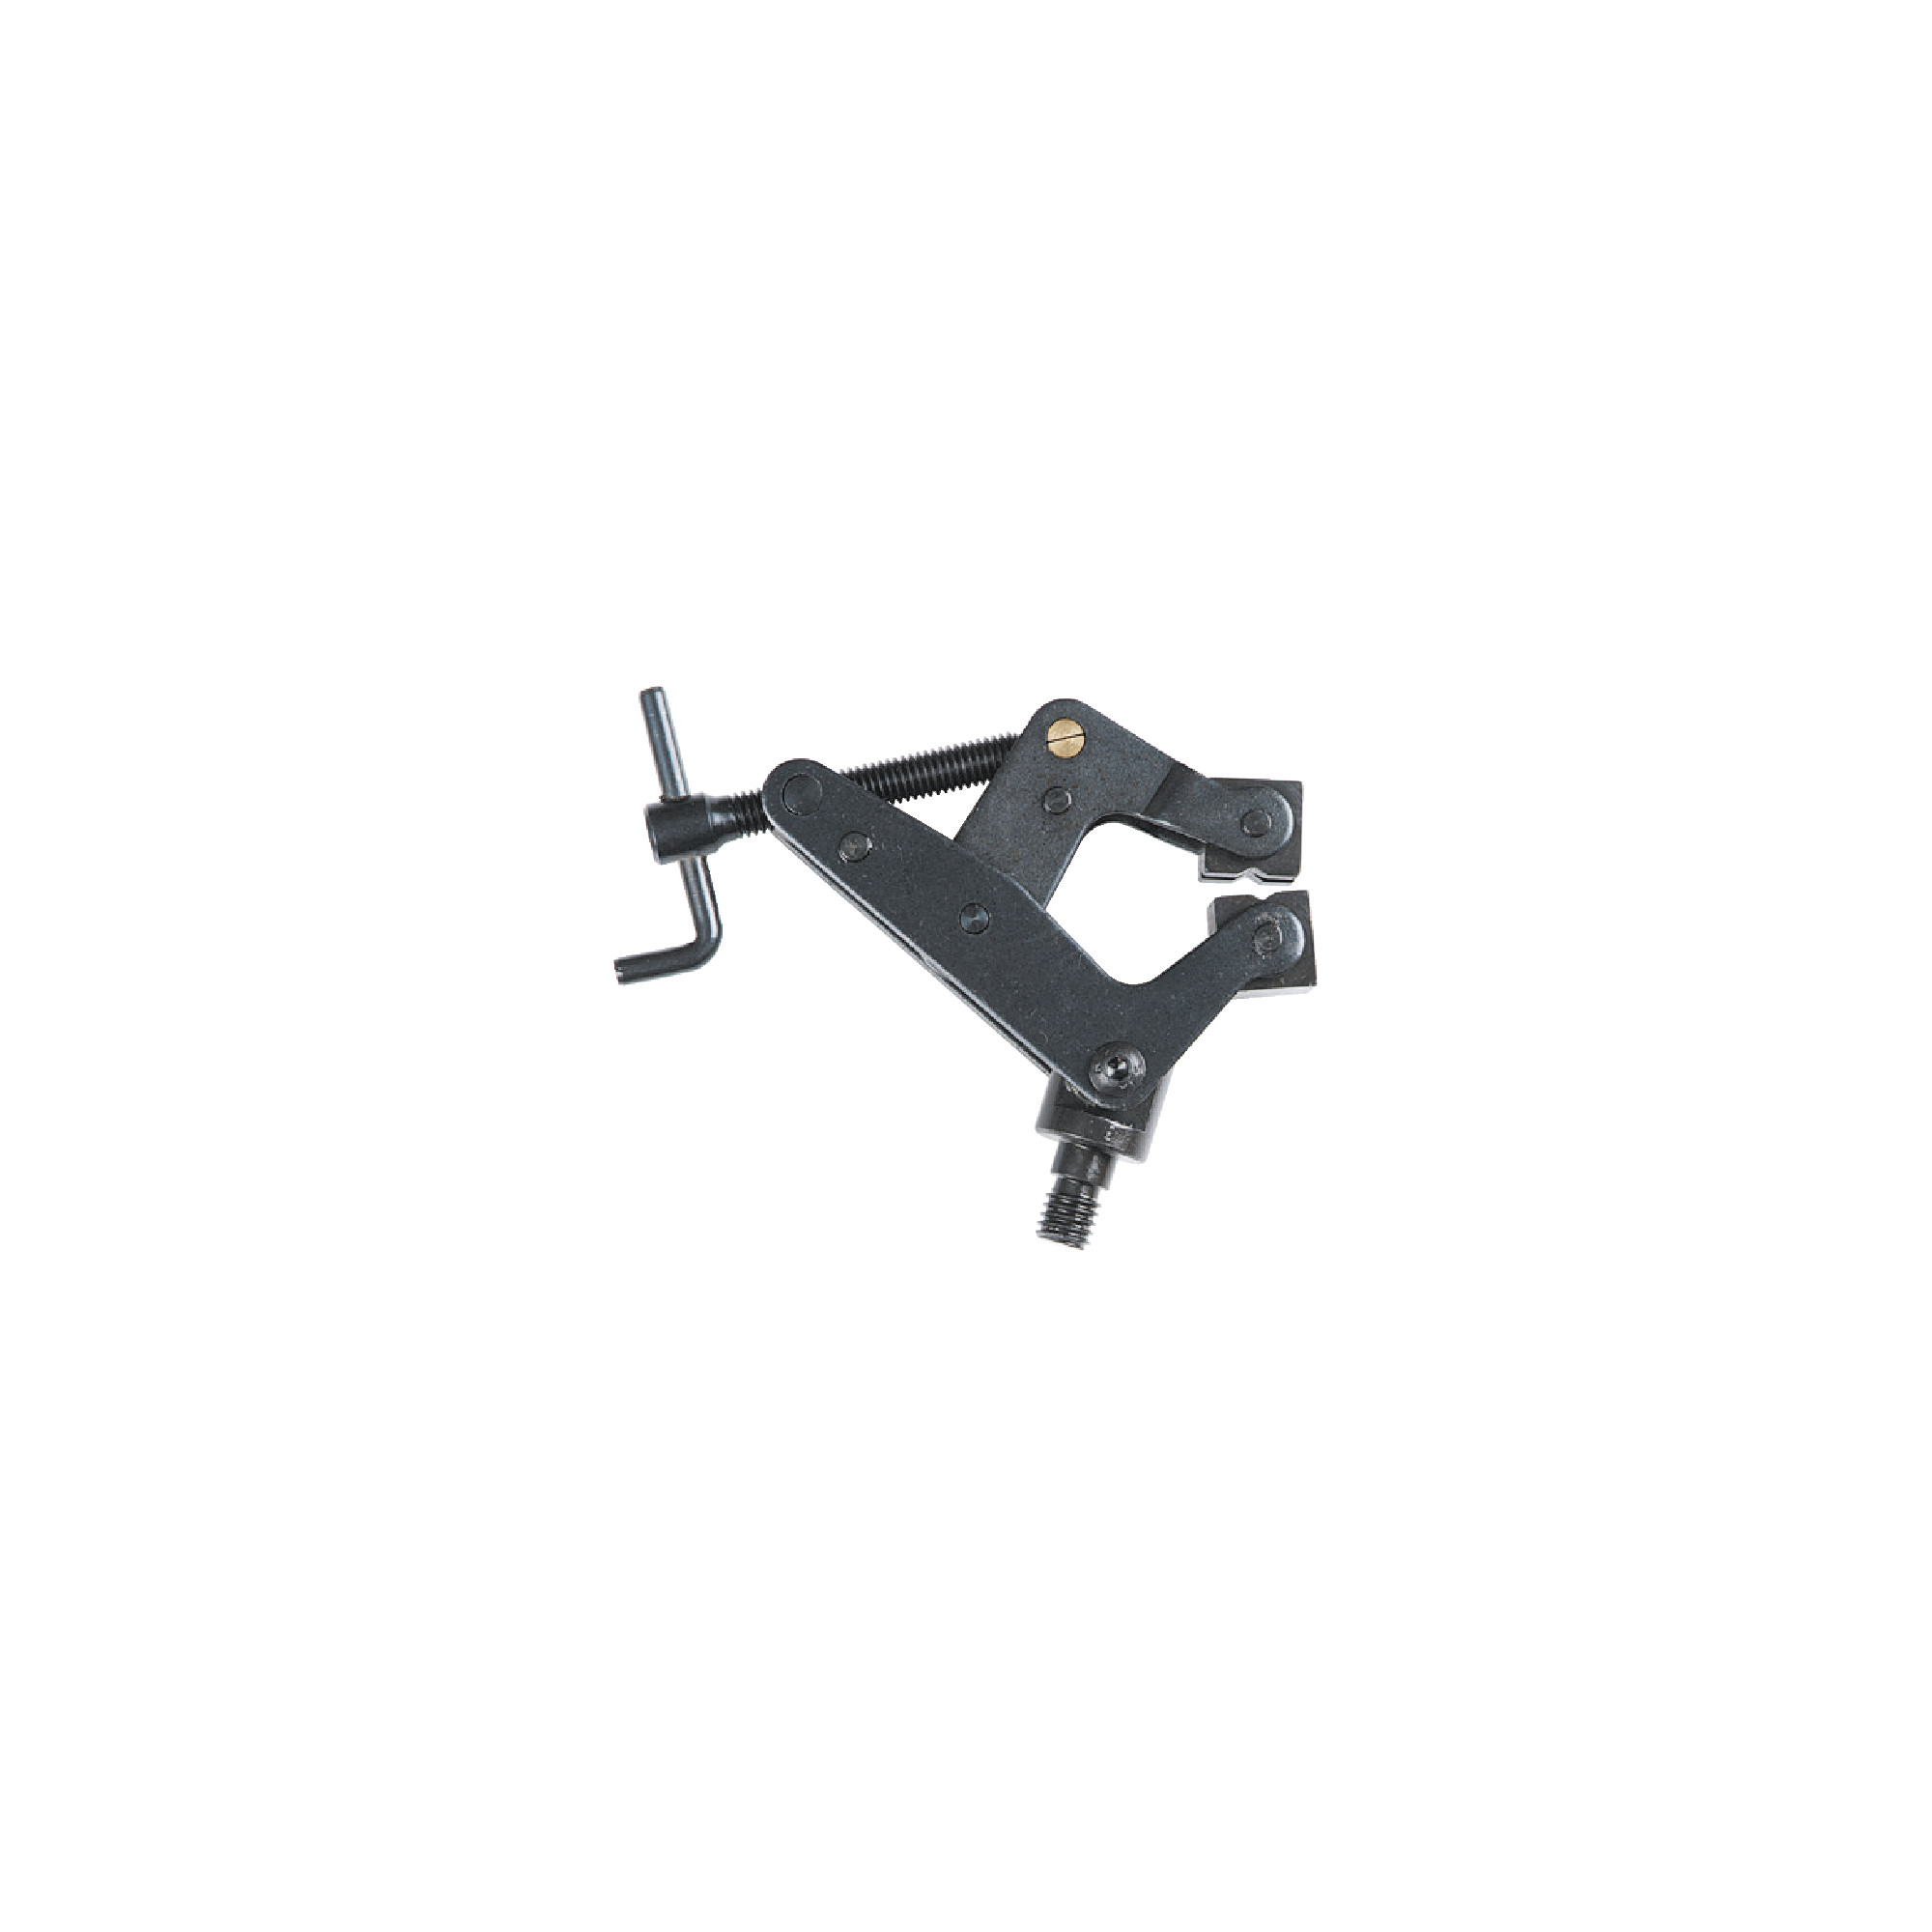 NF0125 1" Clamp